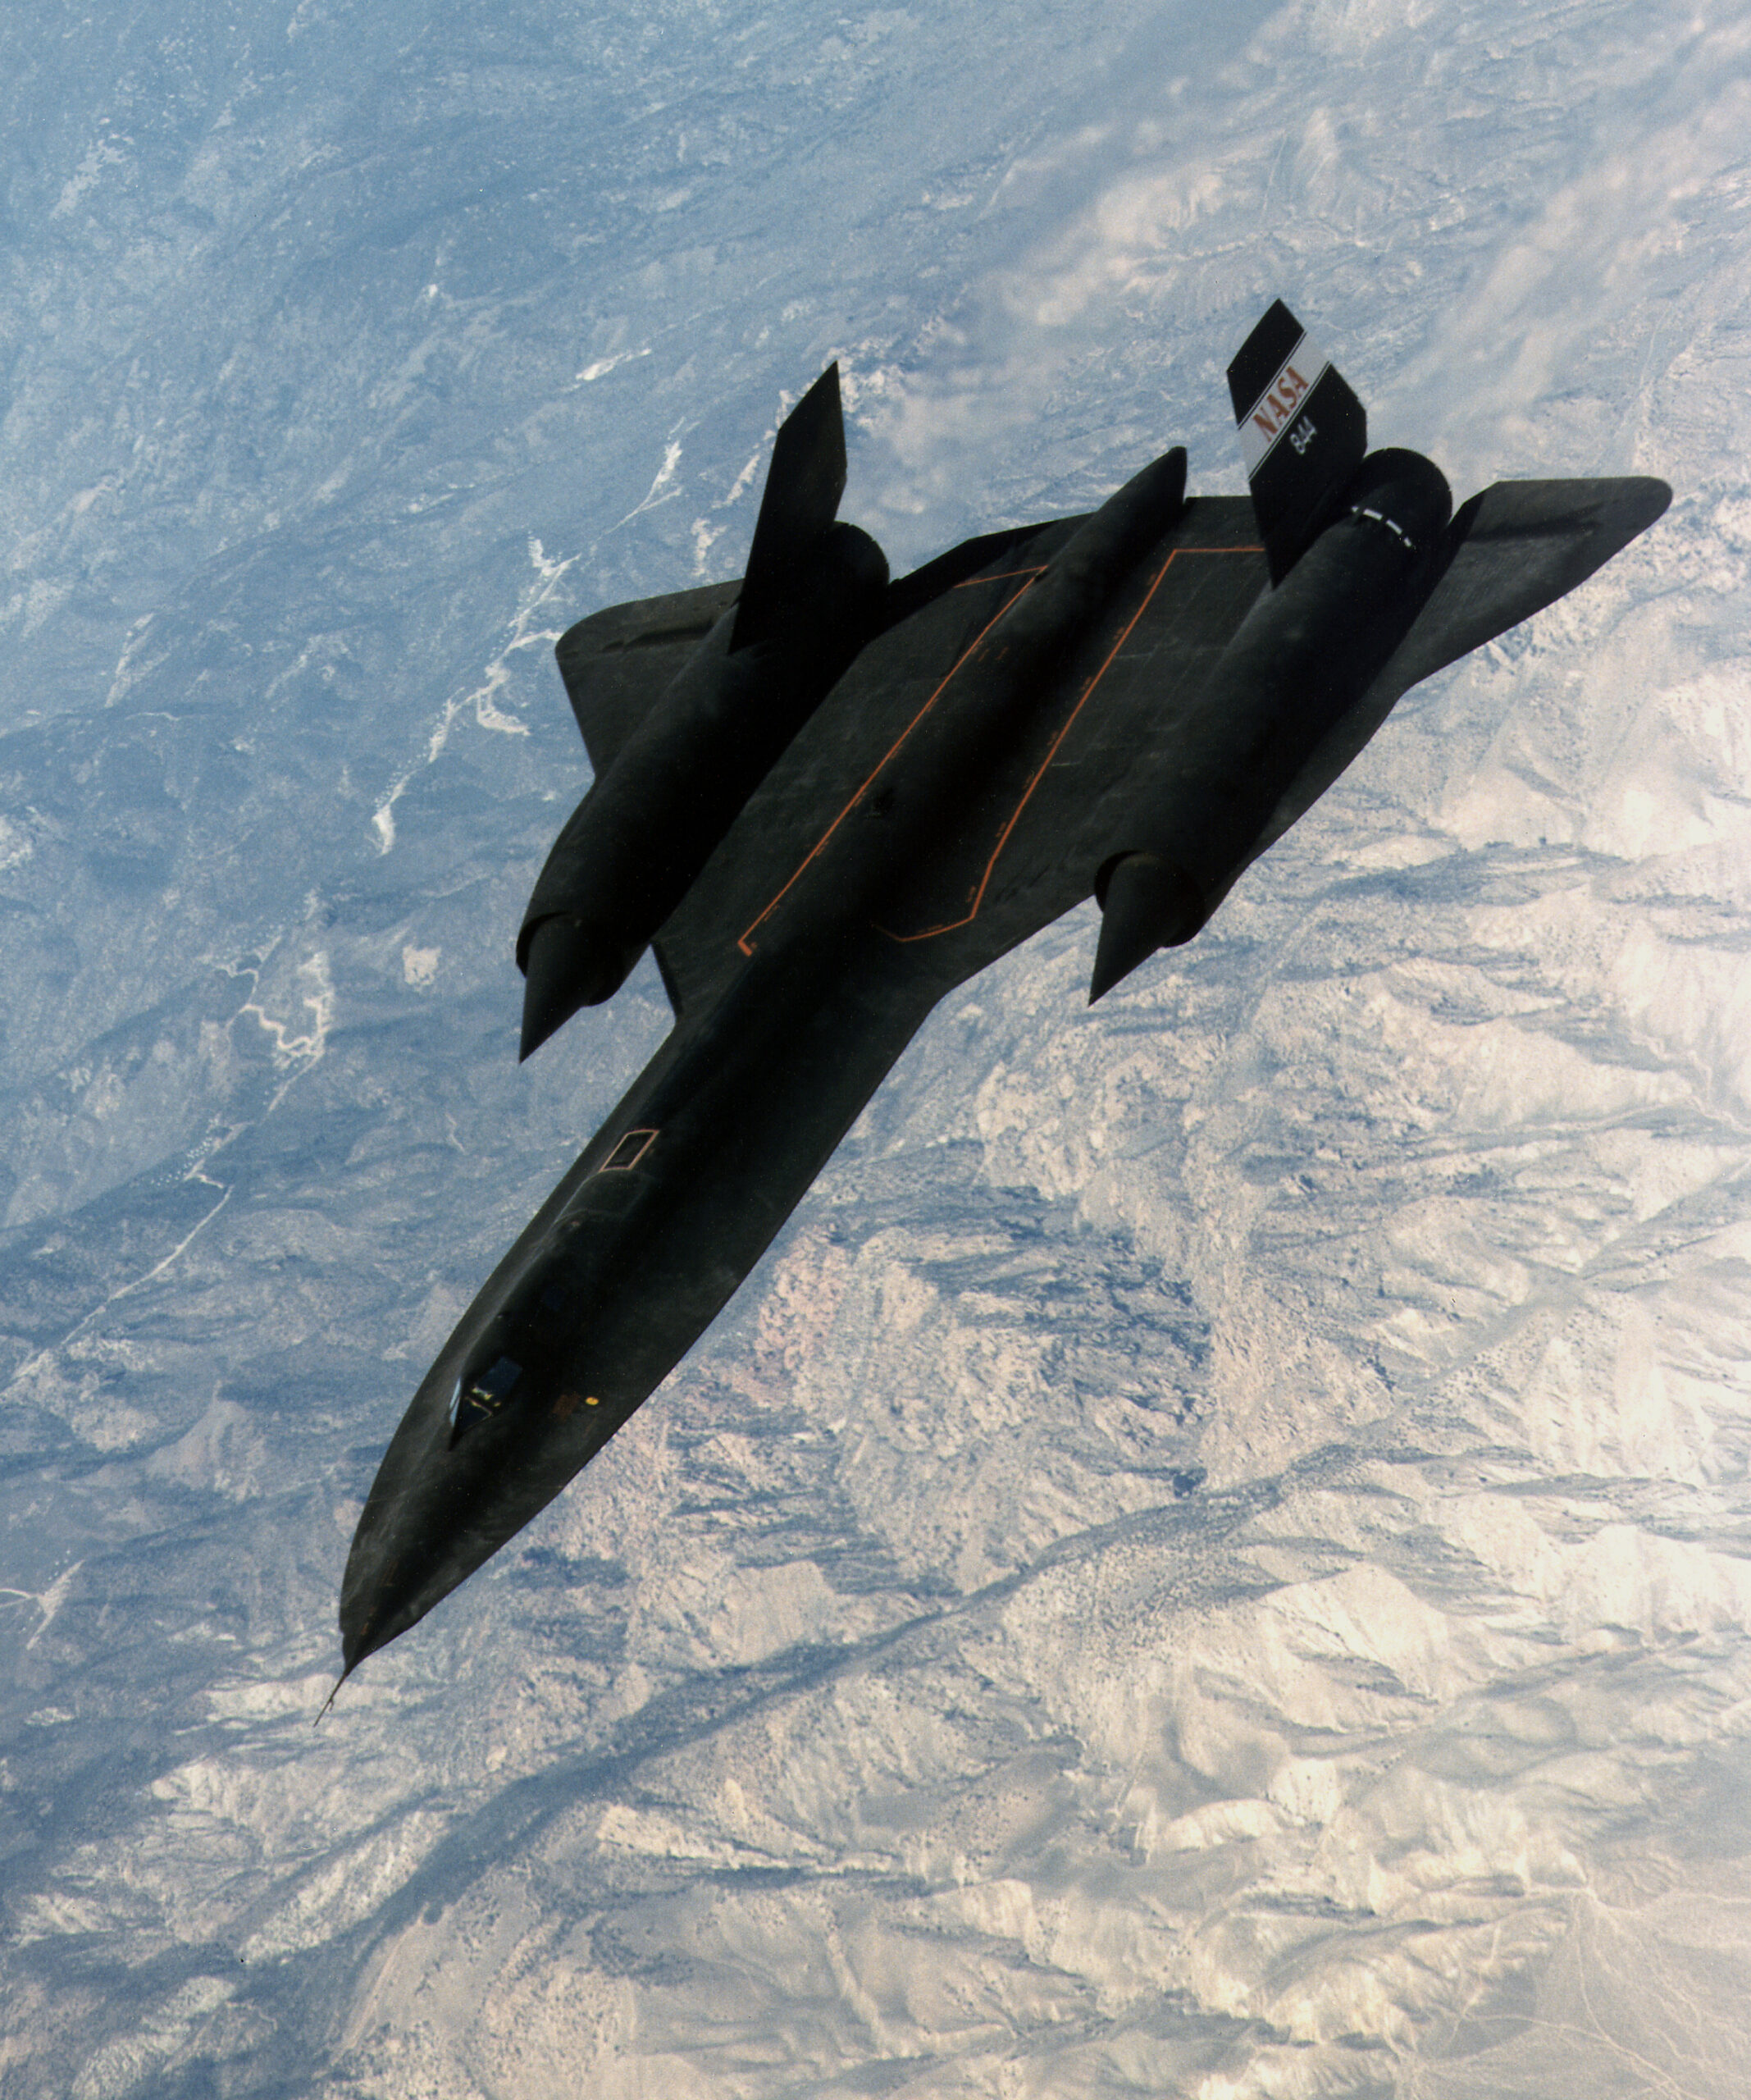 The SR-71 is still the fastest manned aircraft ever.